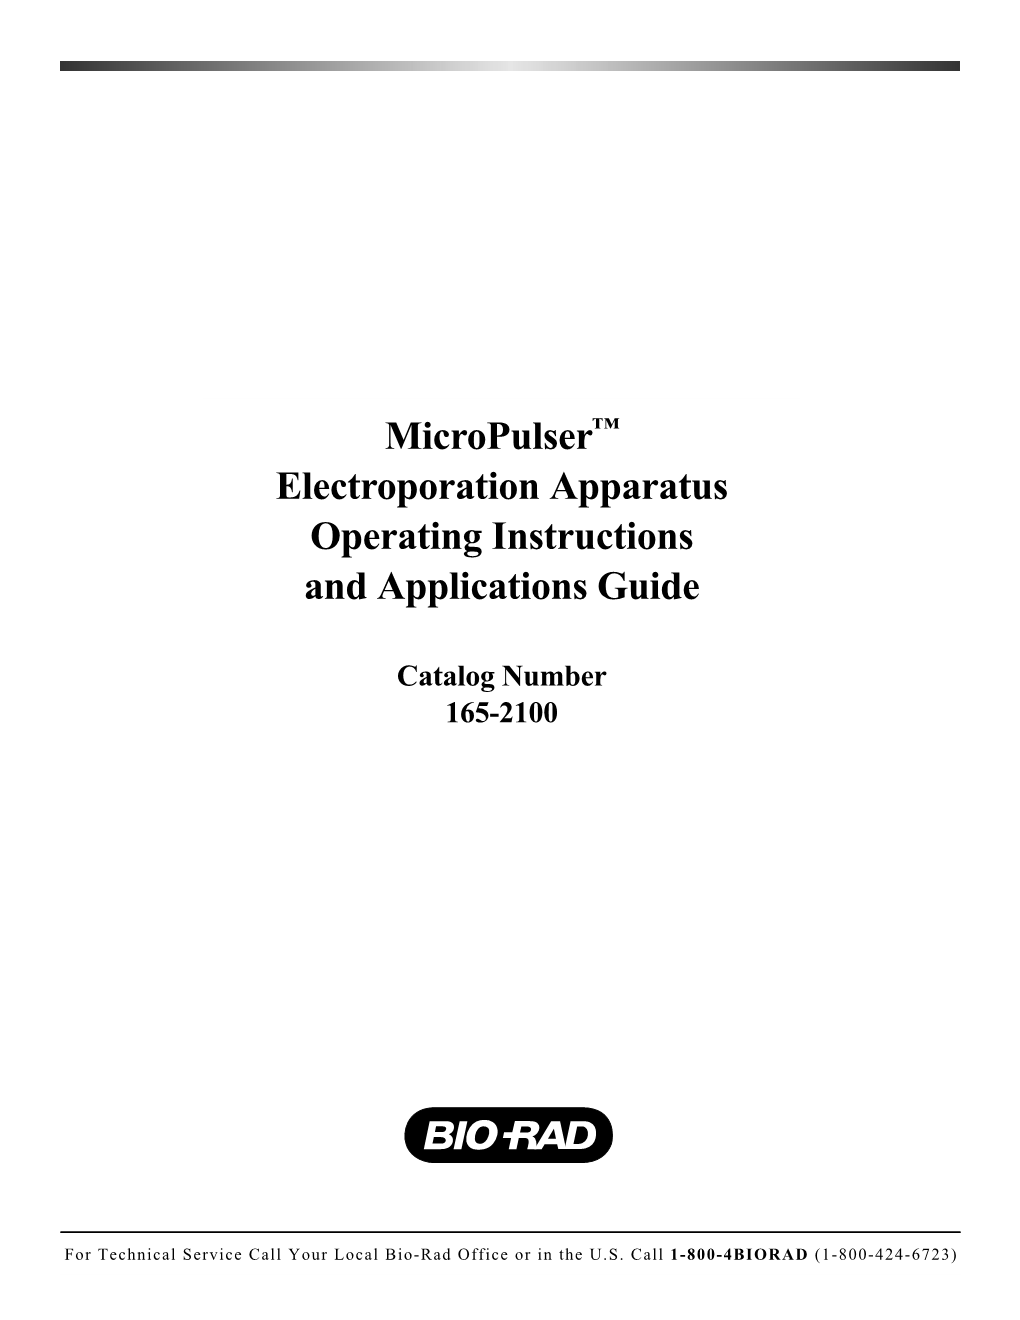 Micropulser™ Electroporation Apparatus Operating Instructions and Applications Guide